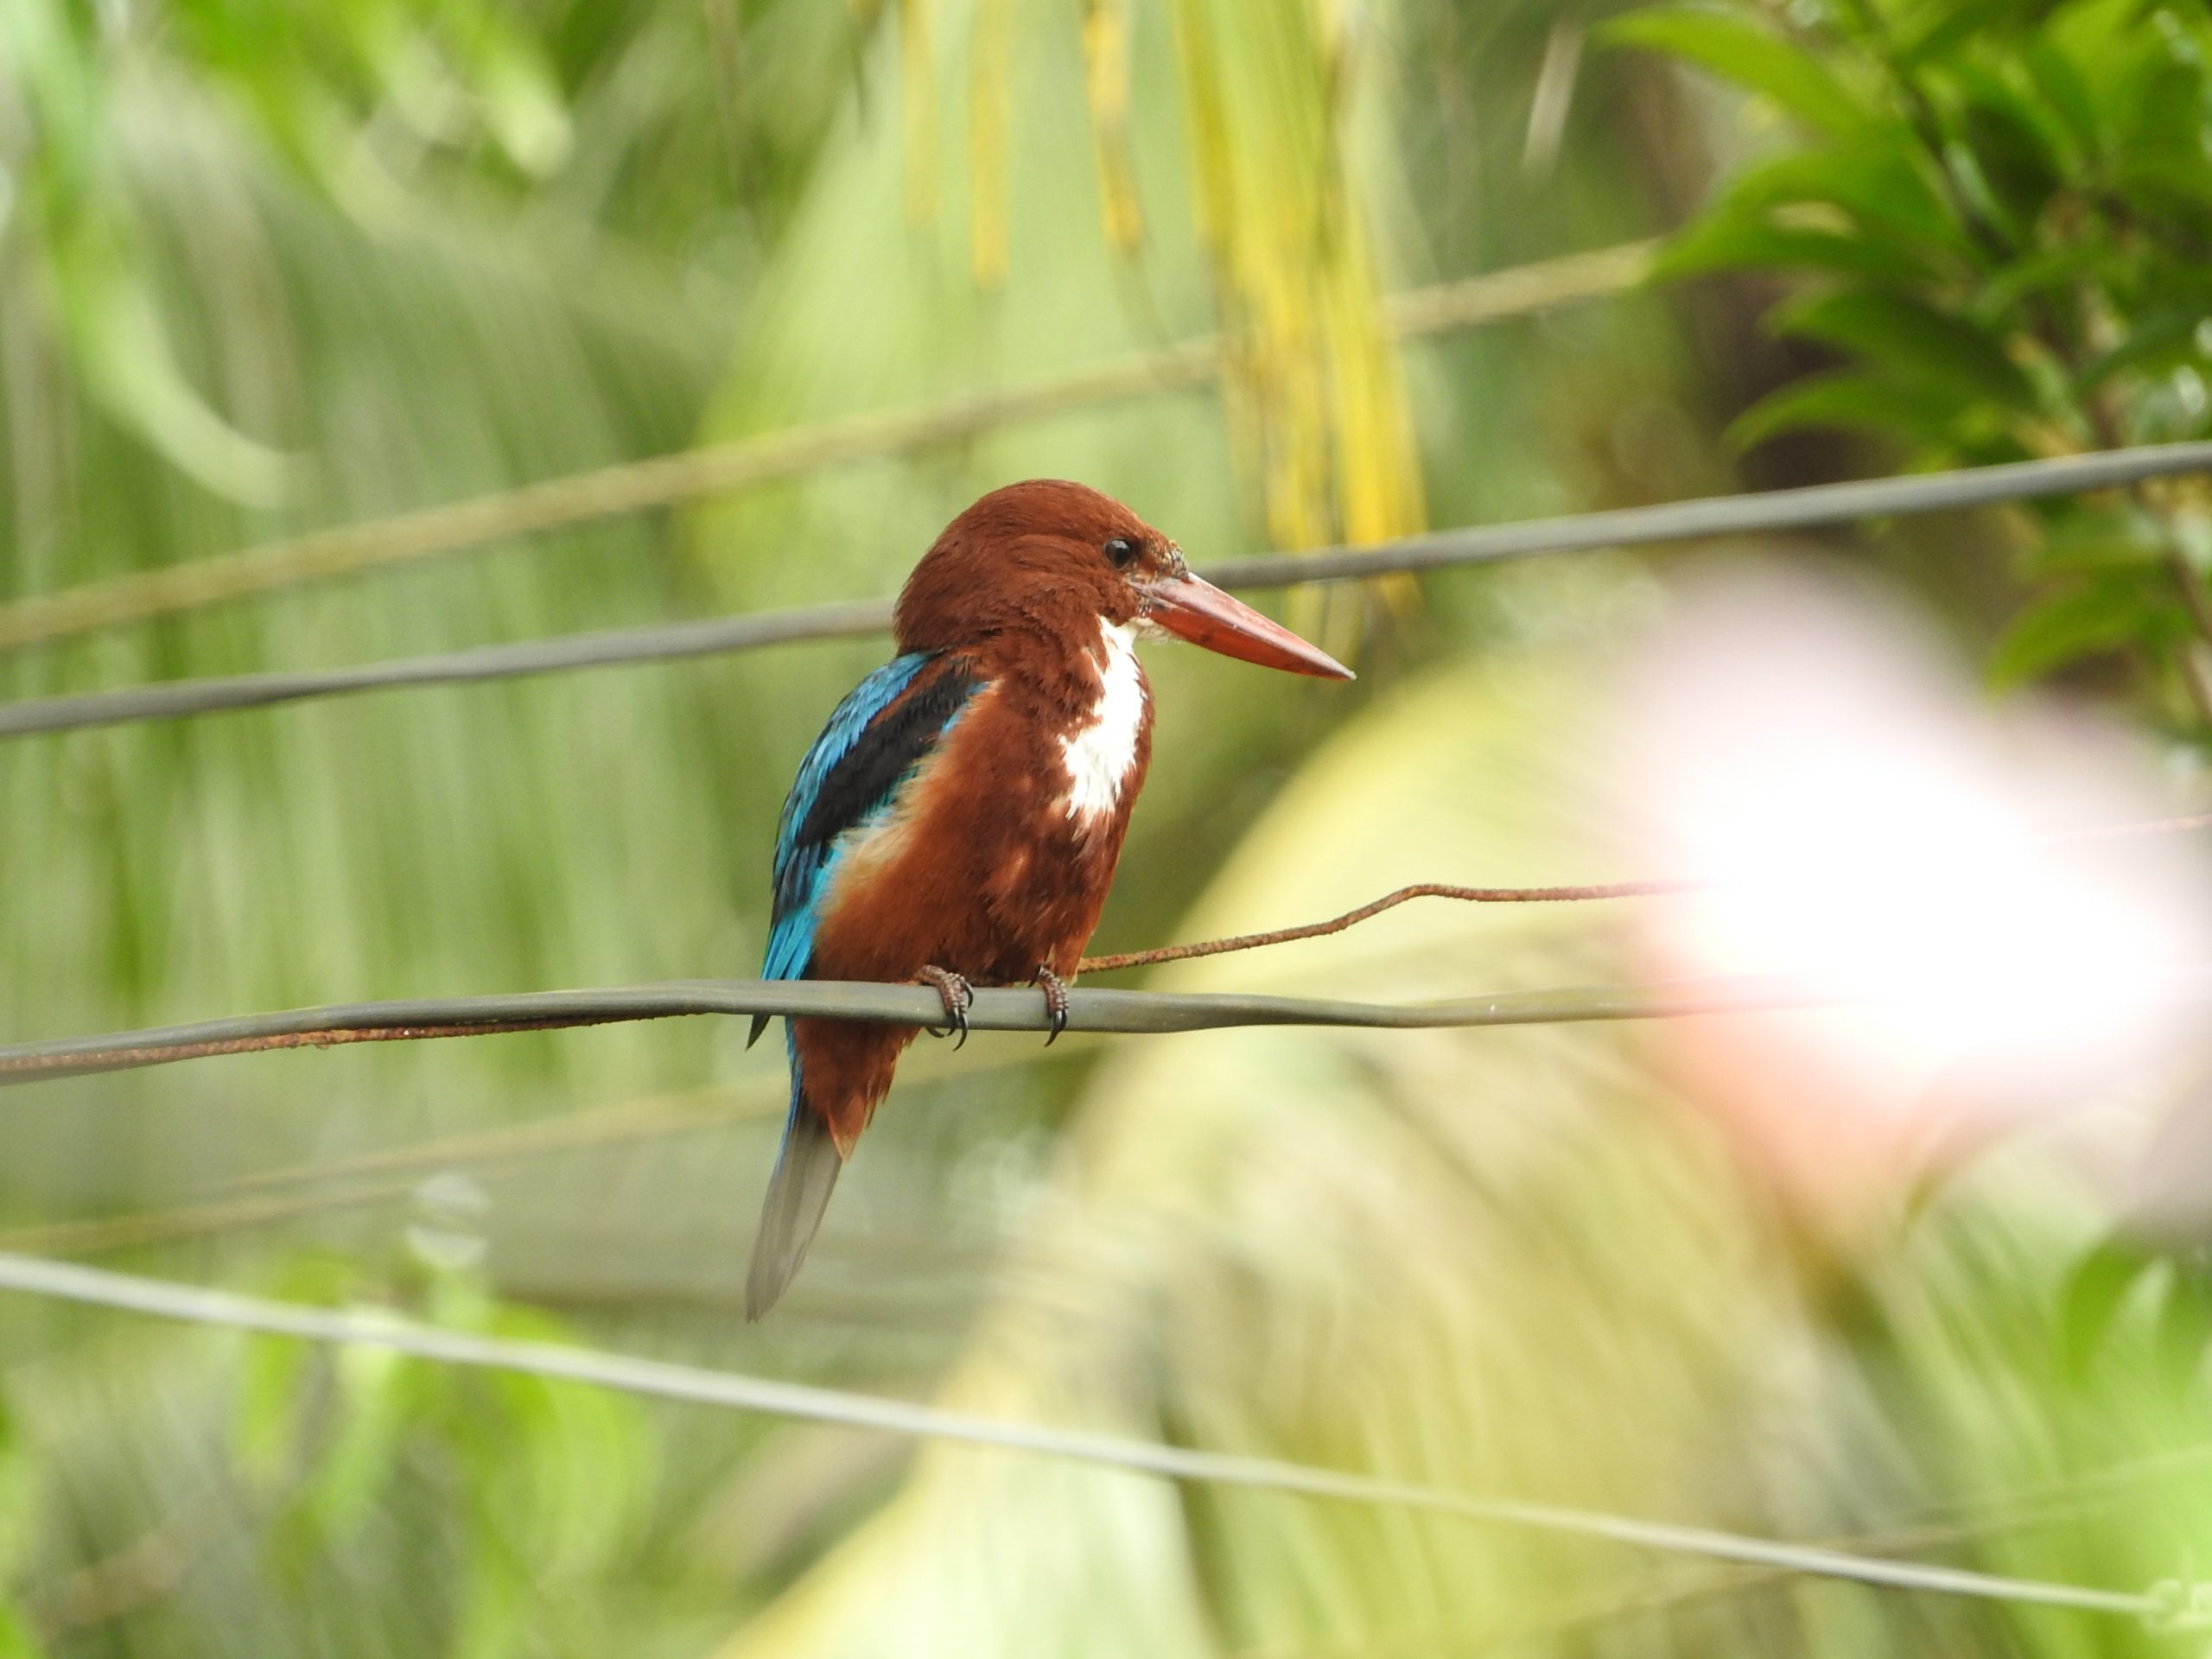 Kingfisher sitting on a wire